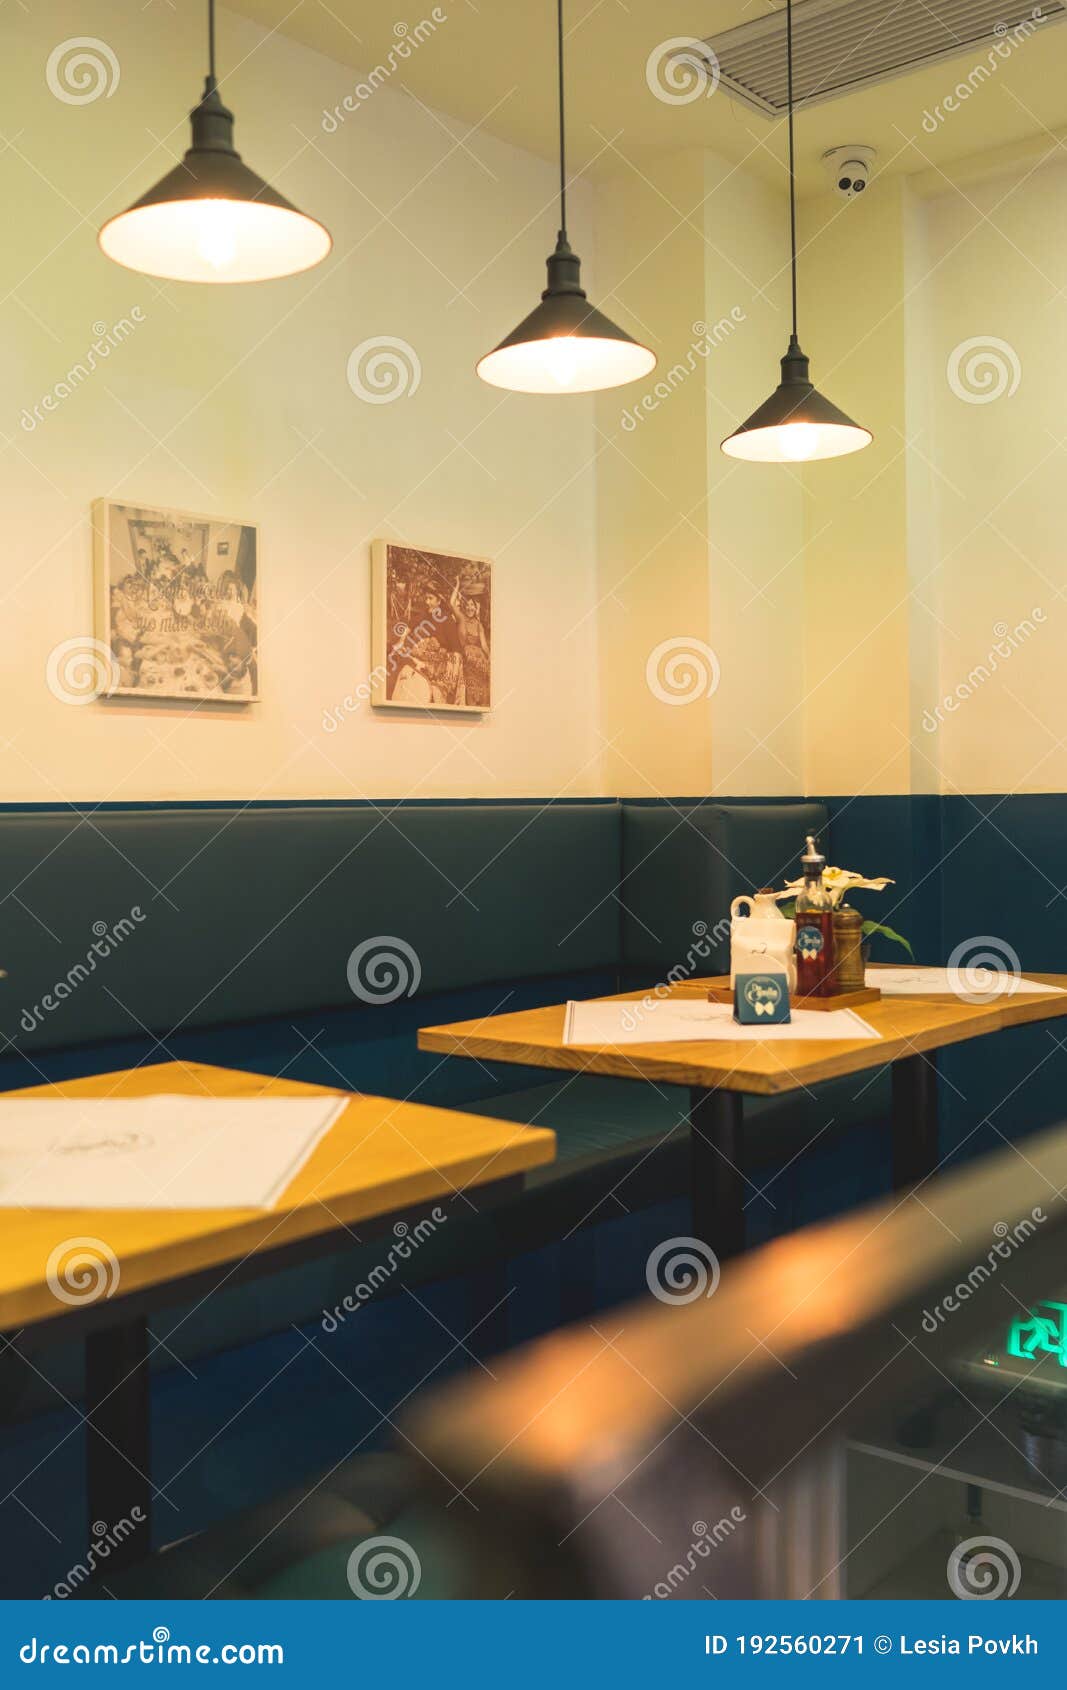 Simple Modern Design of Italian Restaurant, Green and Yellow Interior Decor  with Wooden Furniture Editorial Photo - Image of estate, empty: 192560271